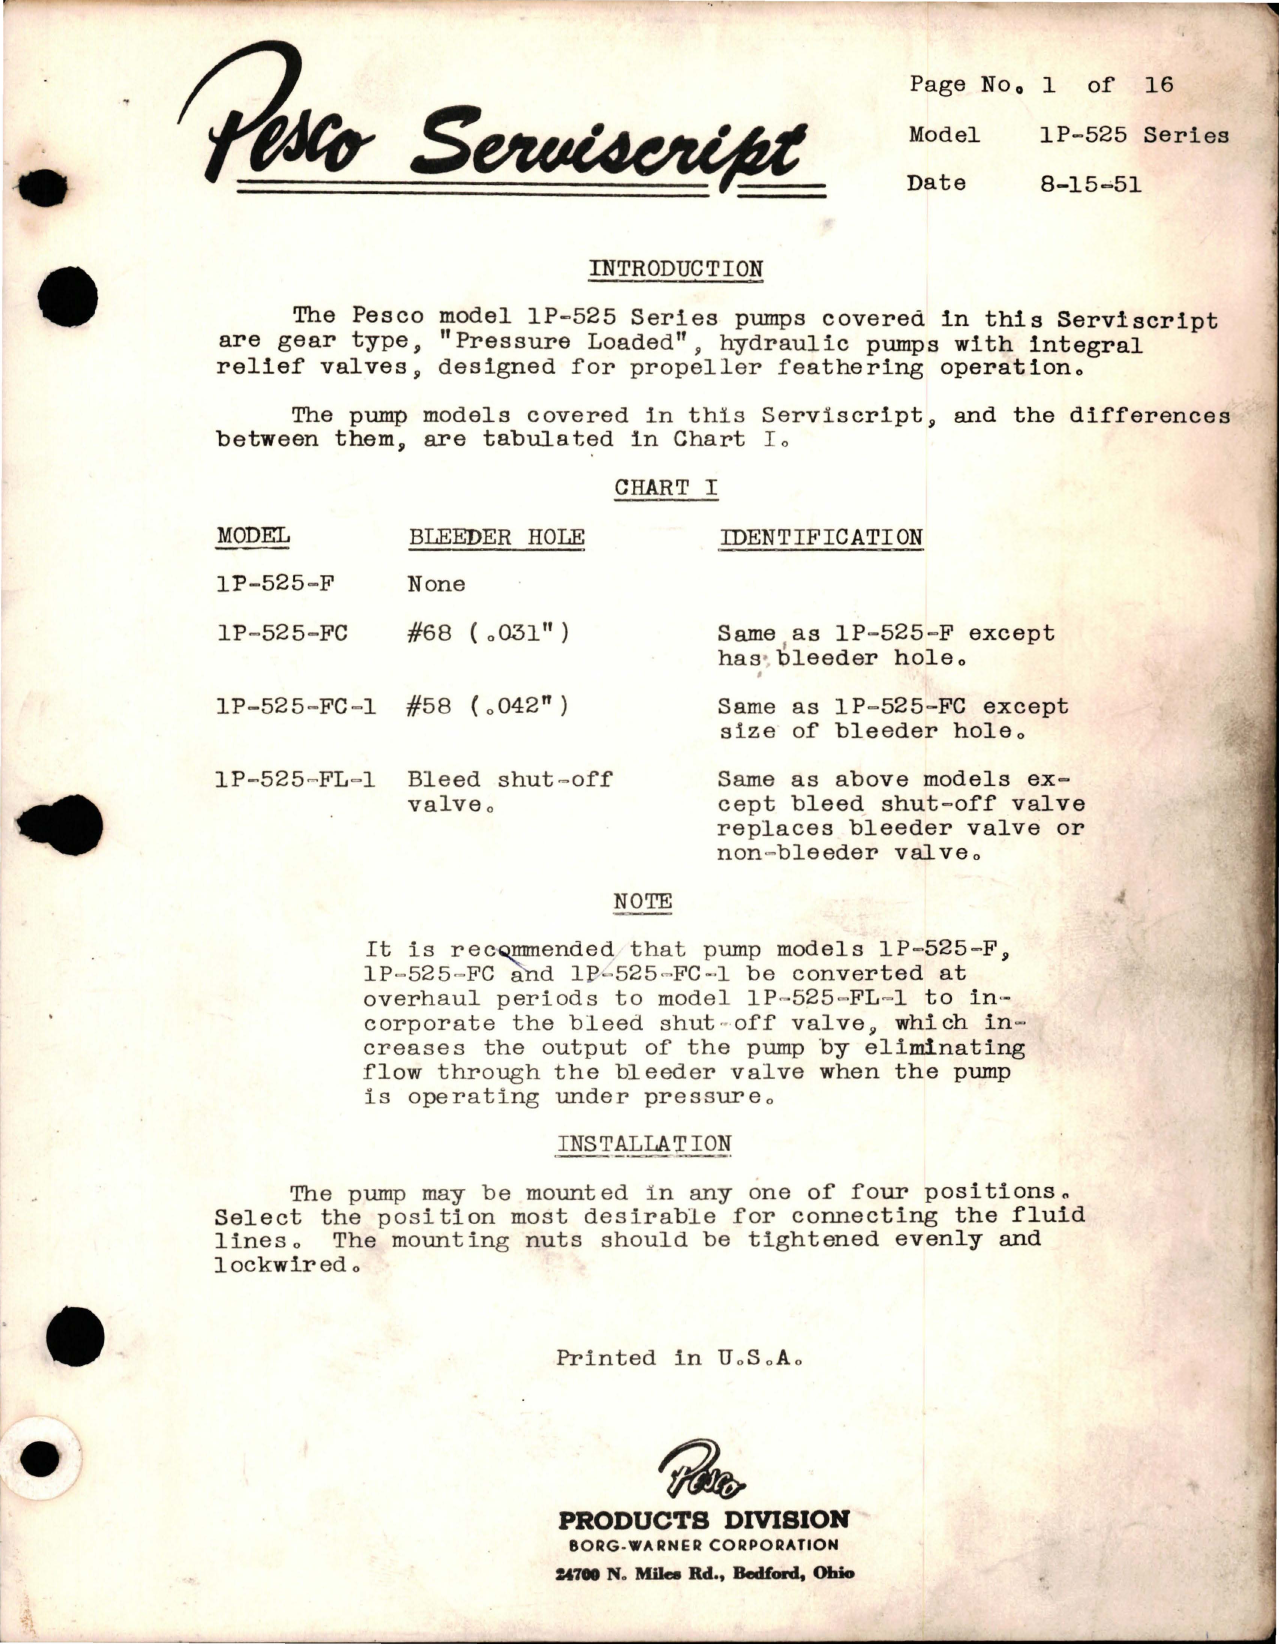 Sample page 1 from AirCorps Library document: Pesco Serviscript - Model 1P-525 Series Hydraulic Pumps